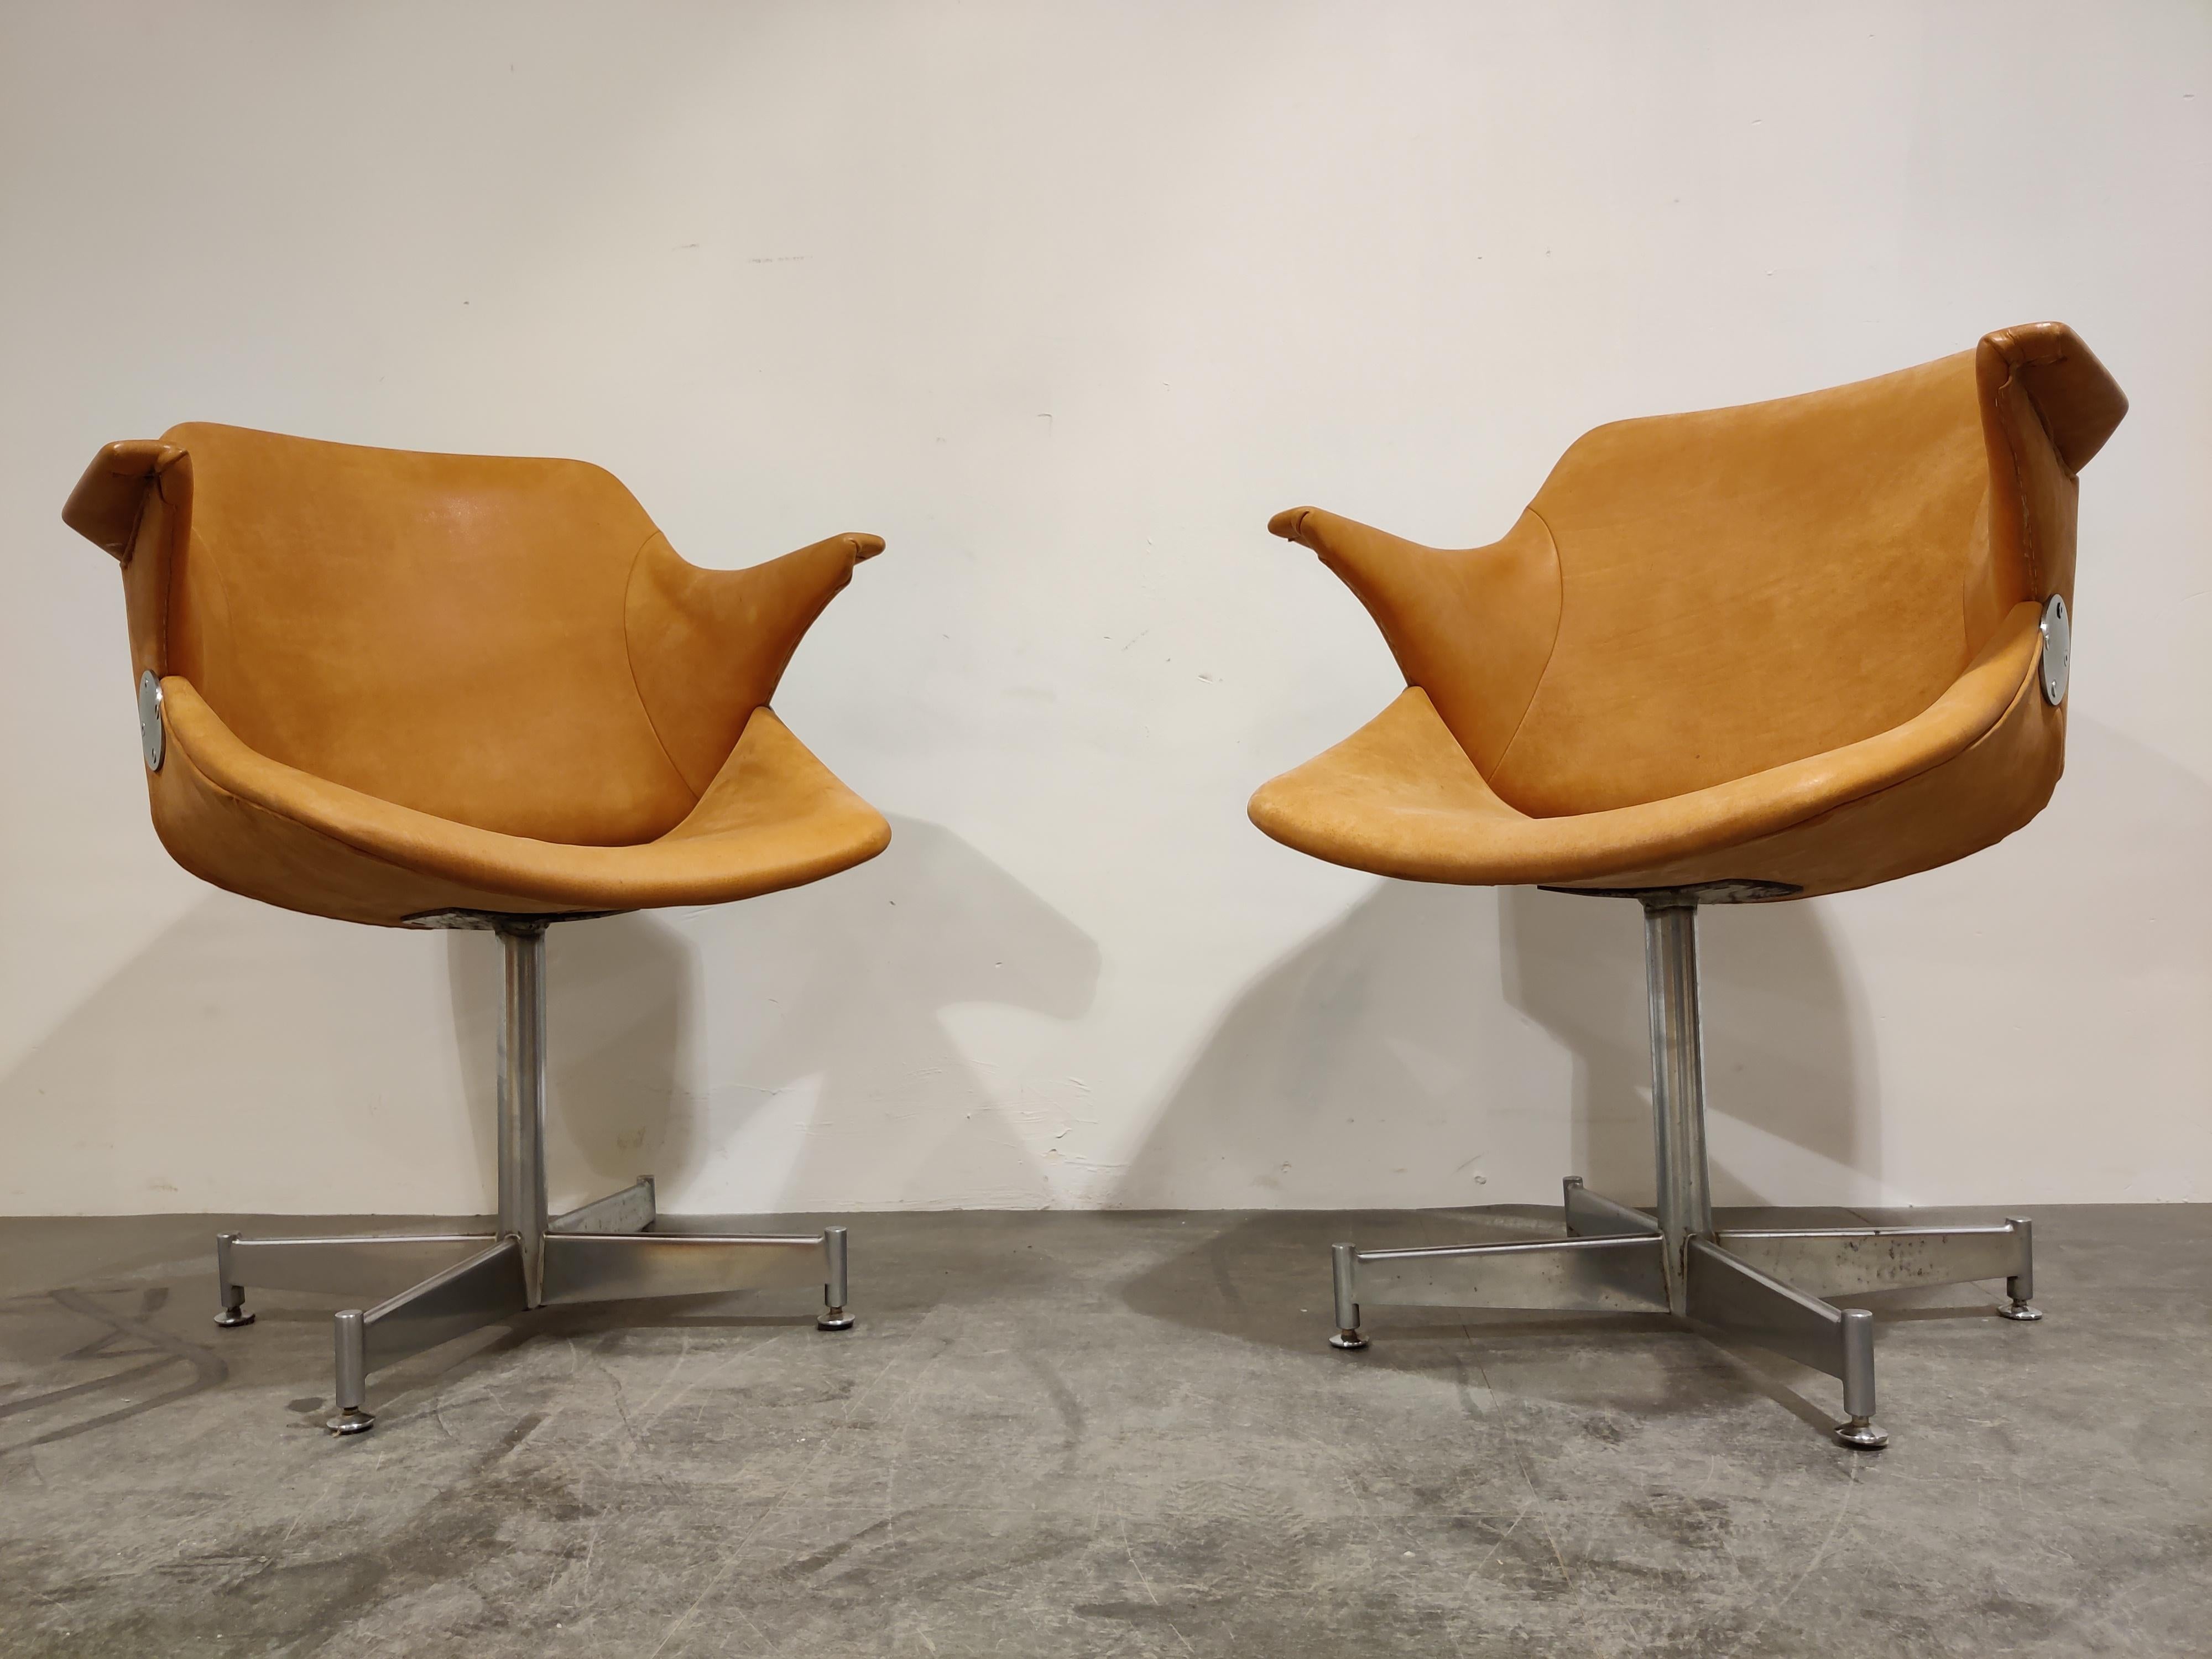 Pair of fantastic looking leather armchairs designed by Geoffrey Harcourt in the 1960s. 

The chair's model name is 'exquis' and they where produced by artifort.

These are quite rare and have a, in our own opinion, beautiful timeless design.